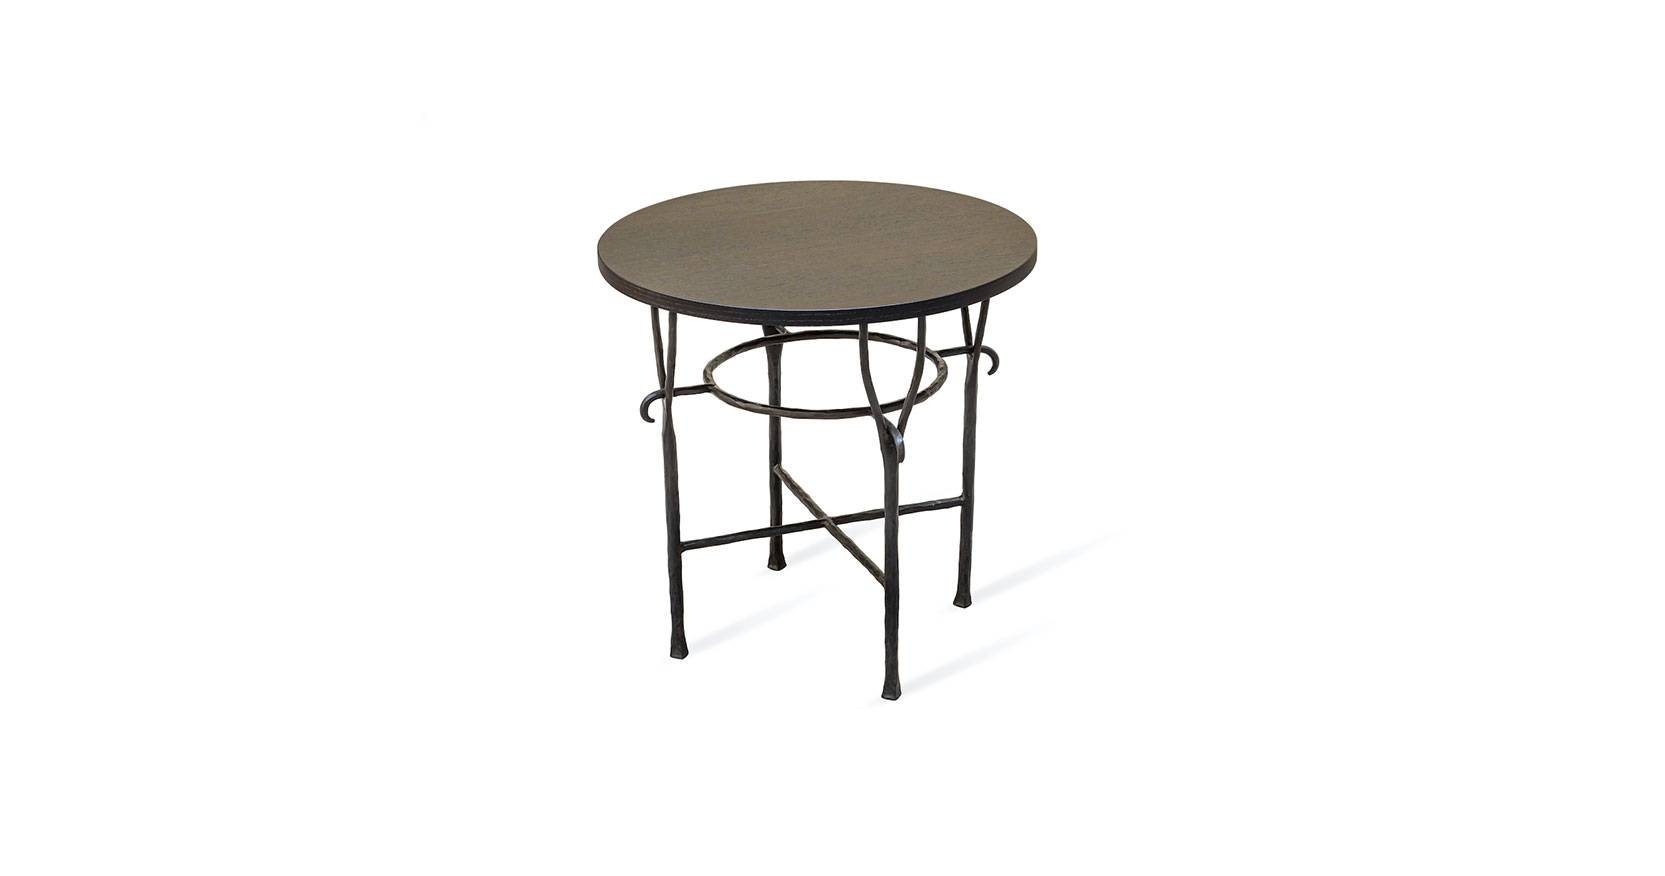 Garouste Bonetti, minimalist round table, dark brown wooden top, black wrought iron legs ending at the top with two forks fixed under the top